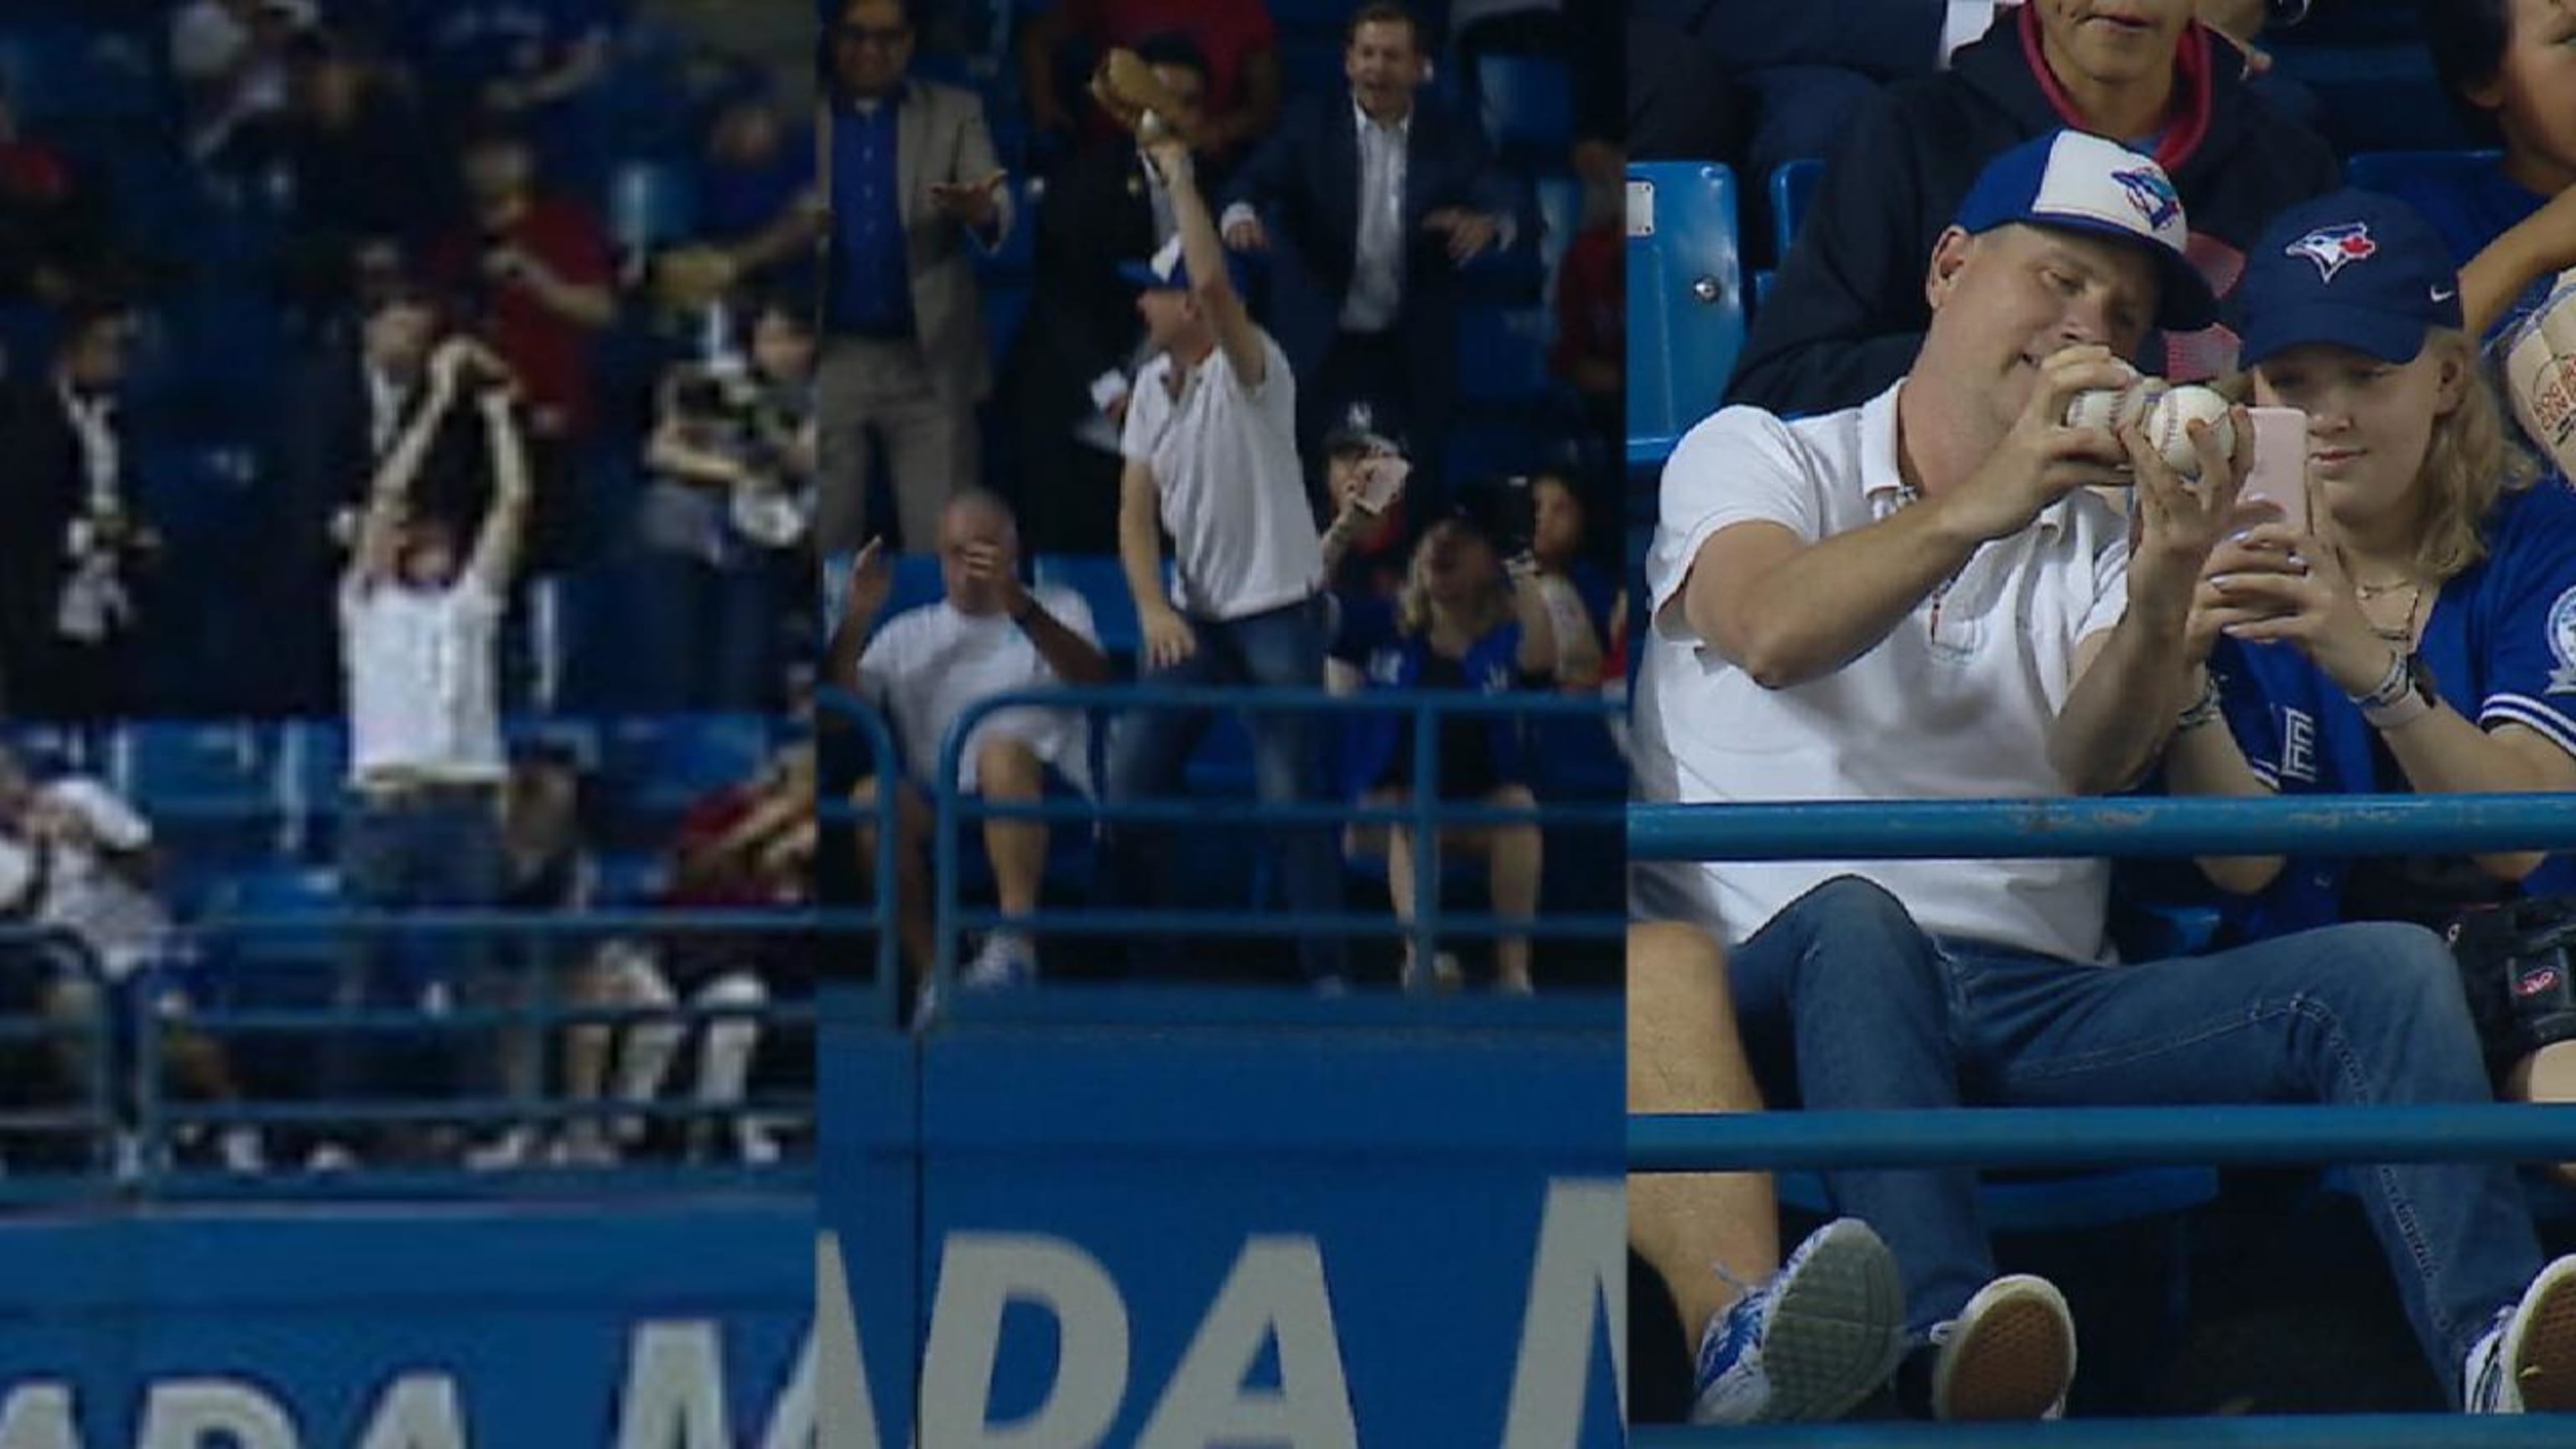 A Blue Jays fan caught two home runs in the same inning